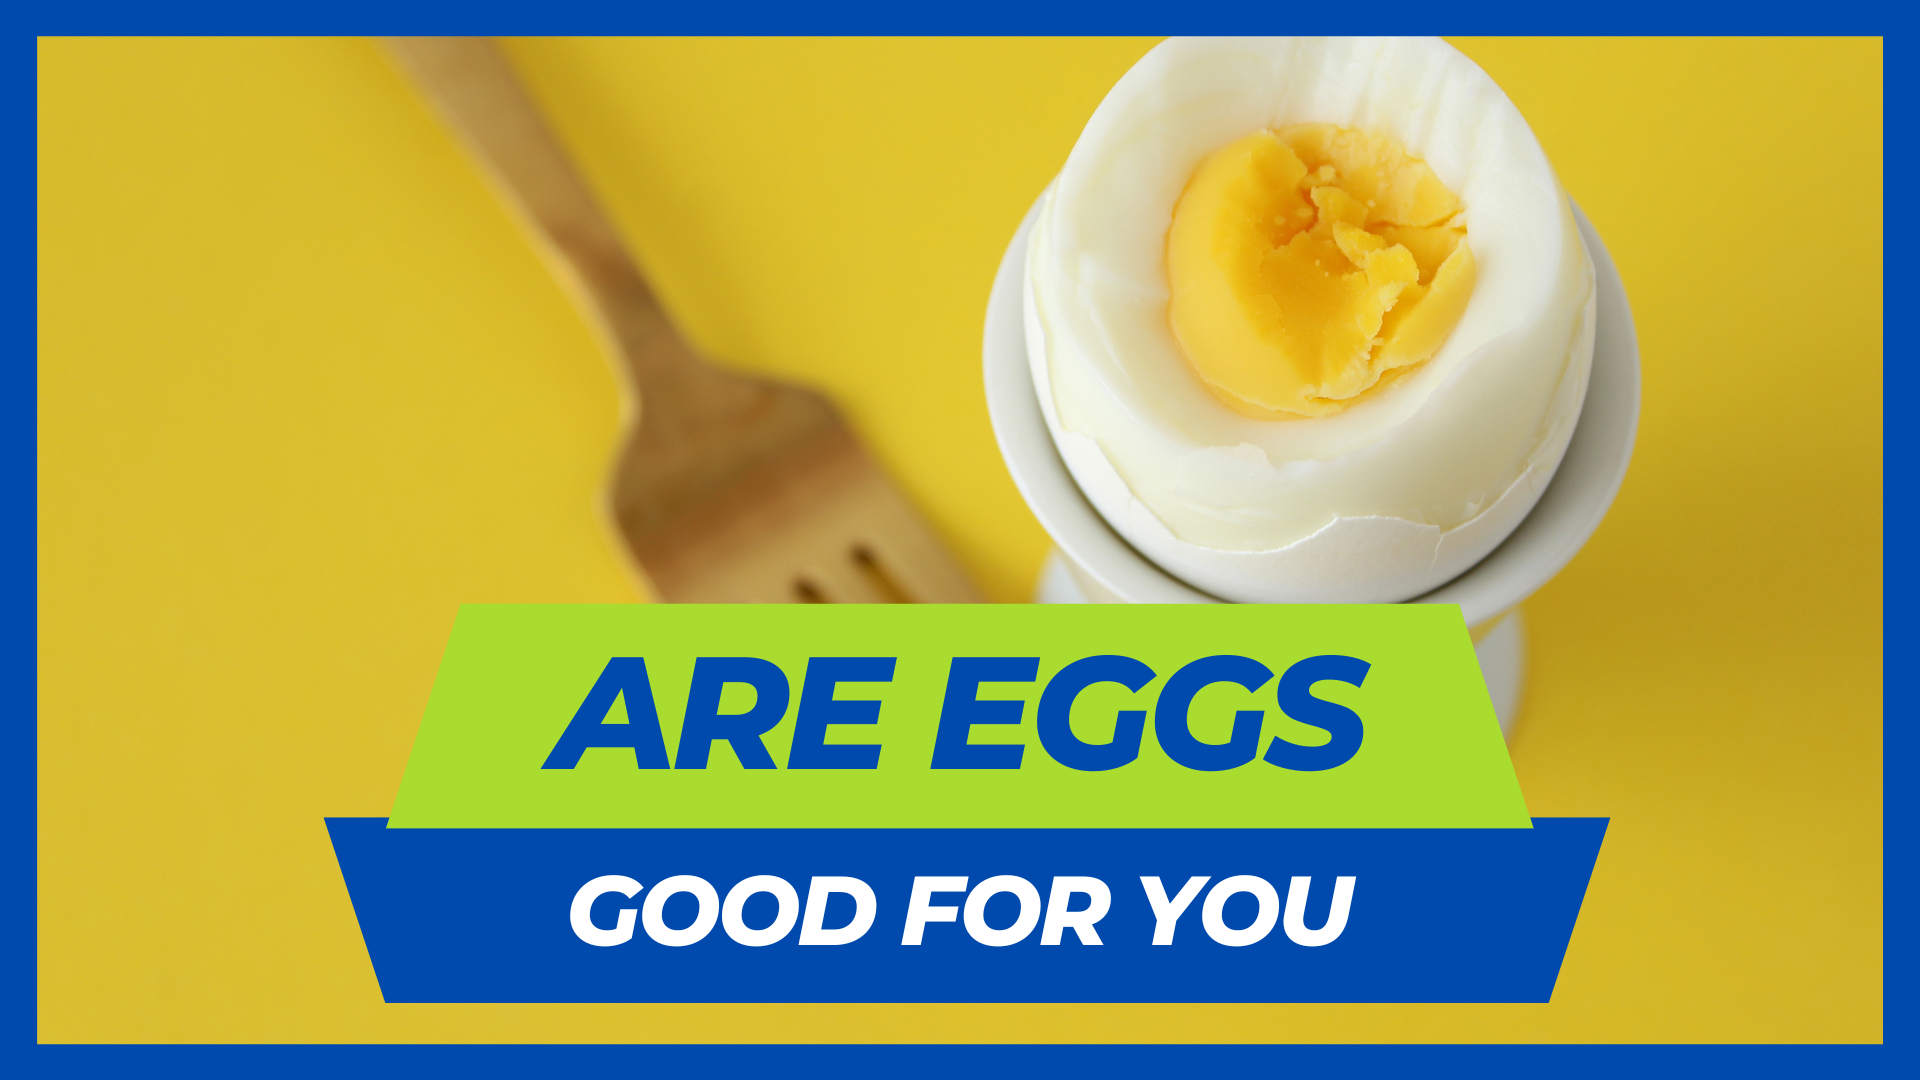 Eggs ARE good for you